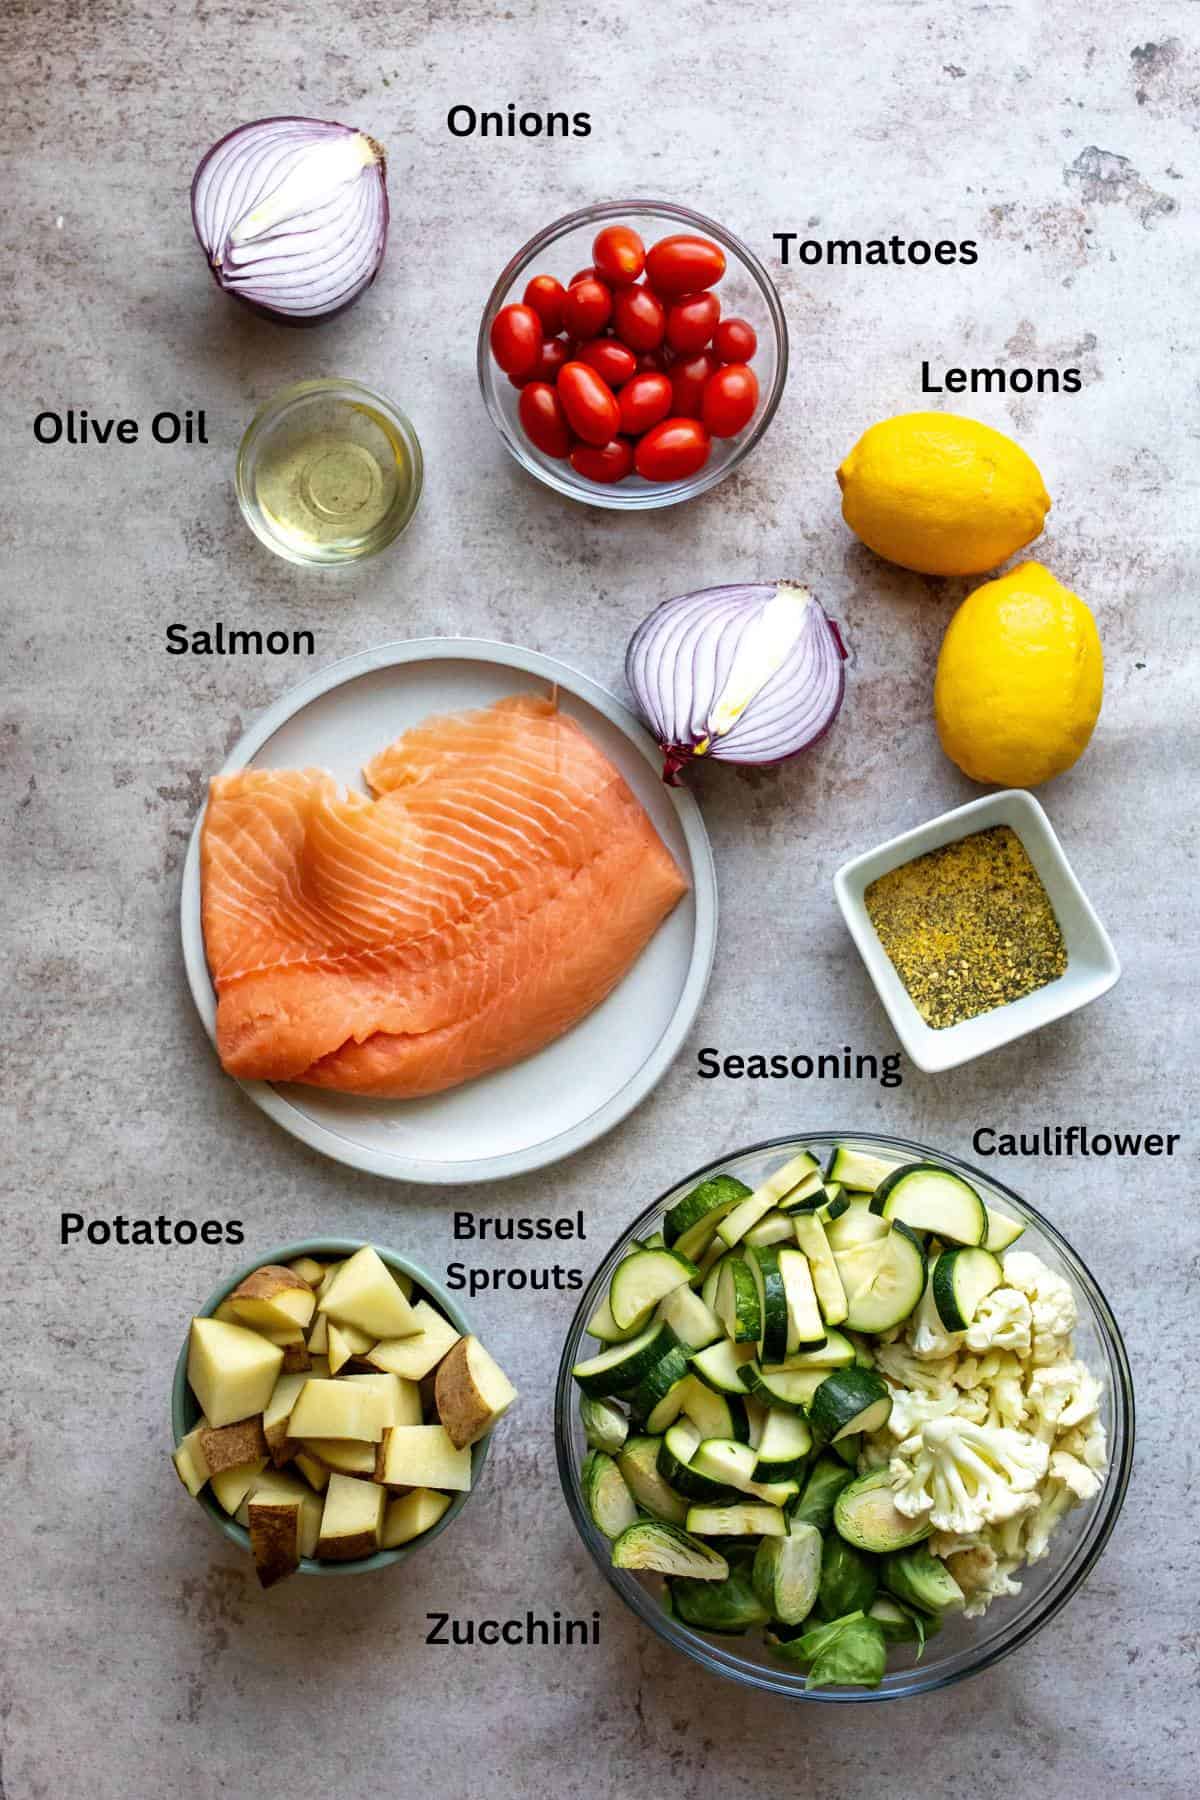 An image of the ingredients of lemon pepper salmon.